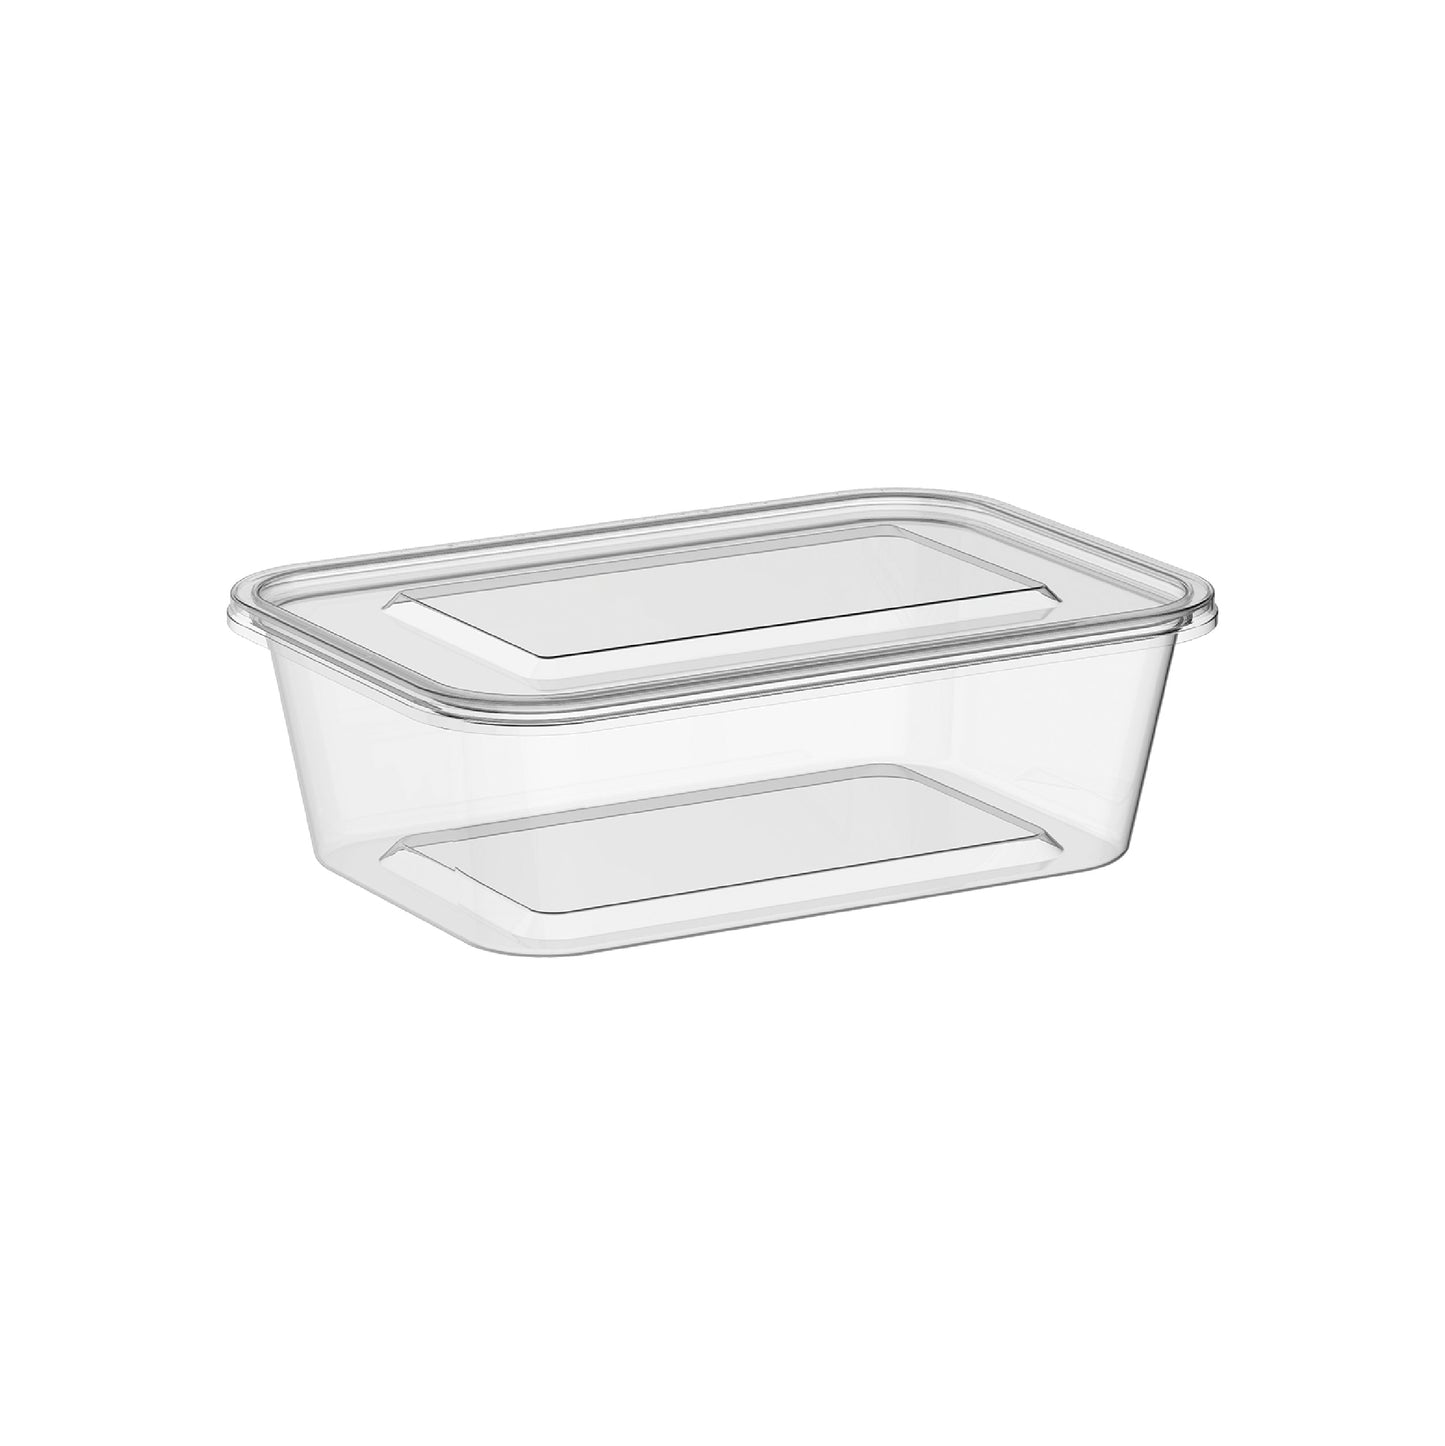 Disposable Plastic Containers 750 ml-Cosmoplast Oman